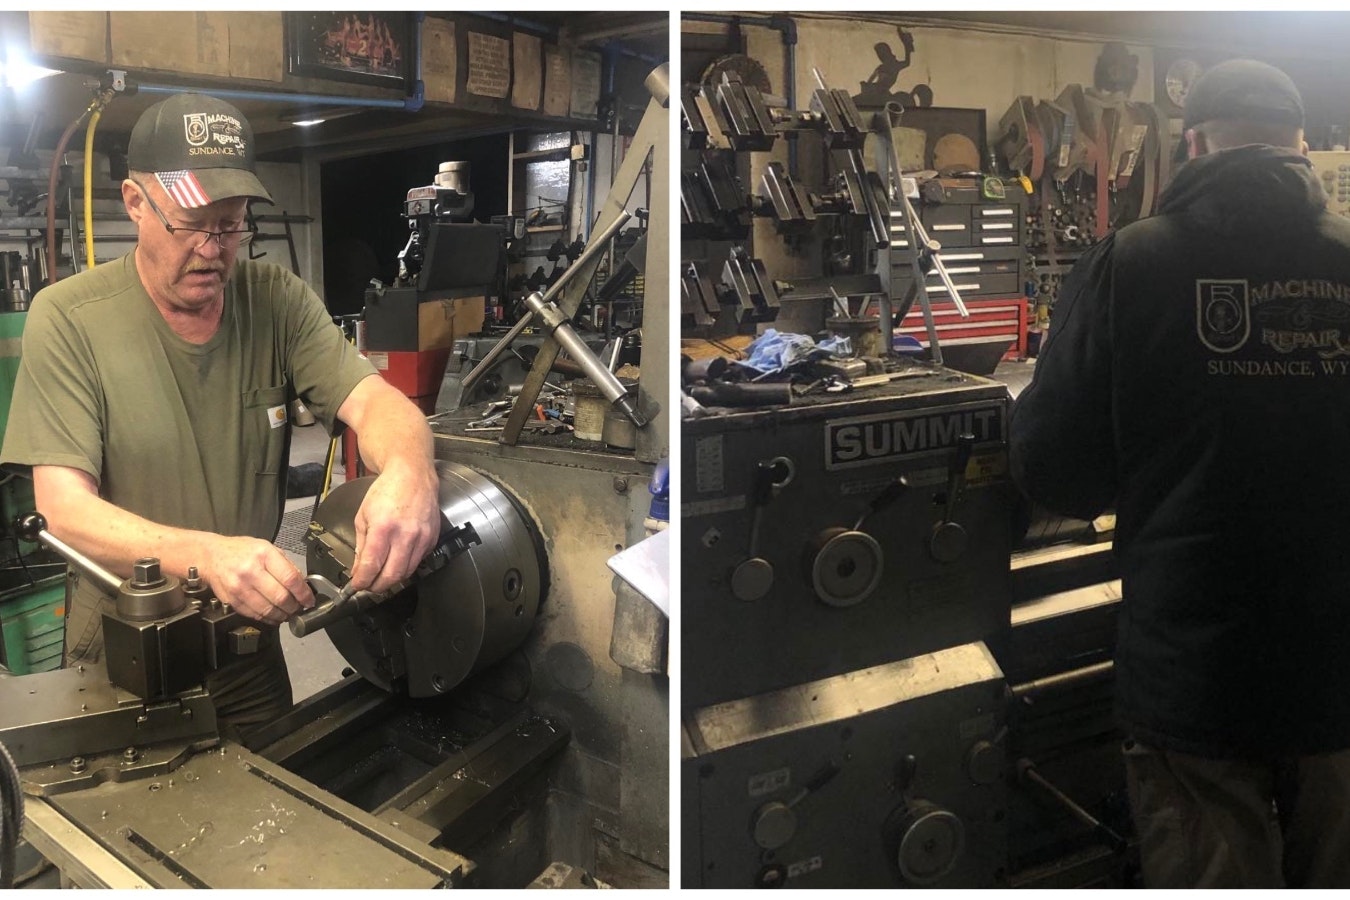 Mike Frolander hones a shaft to size on a lathe in his former shop that he was recently forced to close due to a worker shortage. He's has spent many hours fabricating and repairing equipment and specialized parts in the machine shop his dad, Robert, opened in 1981.